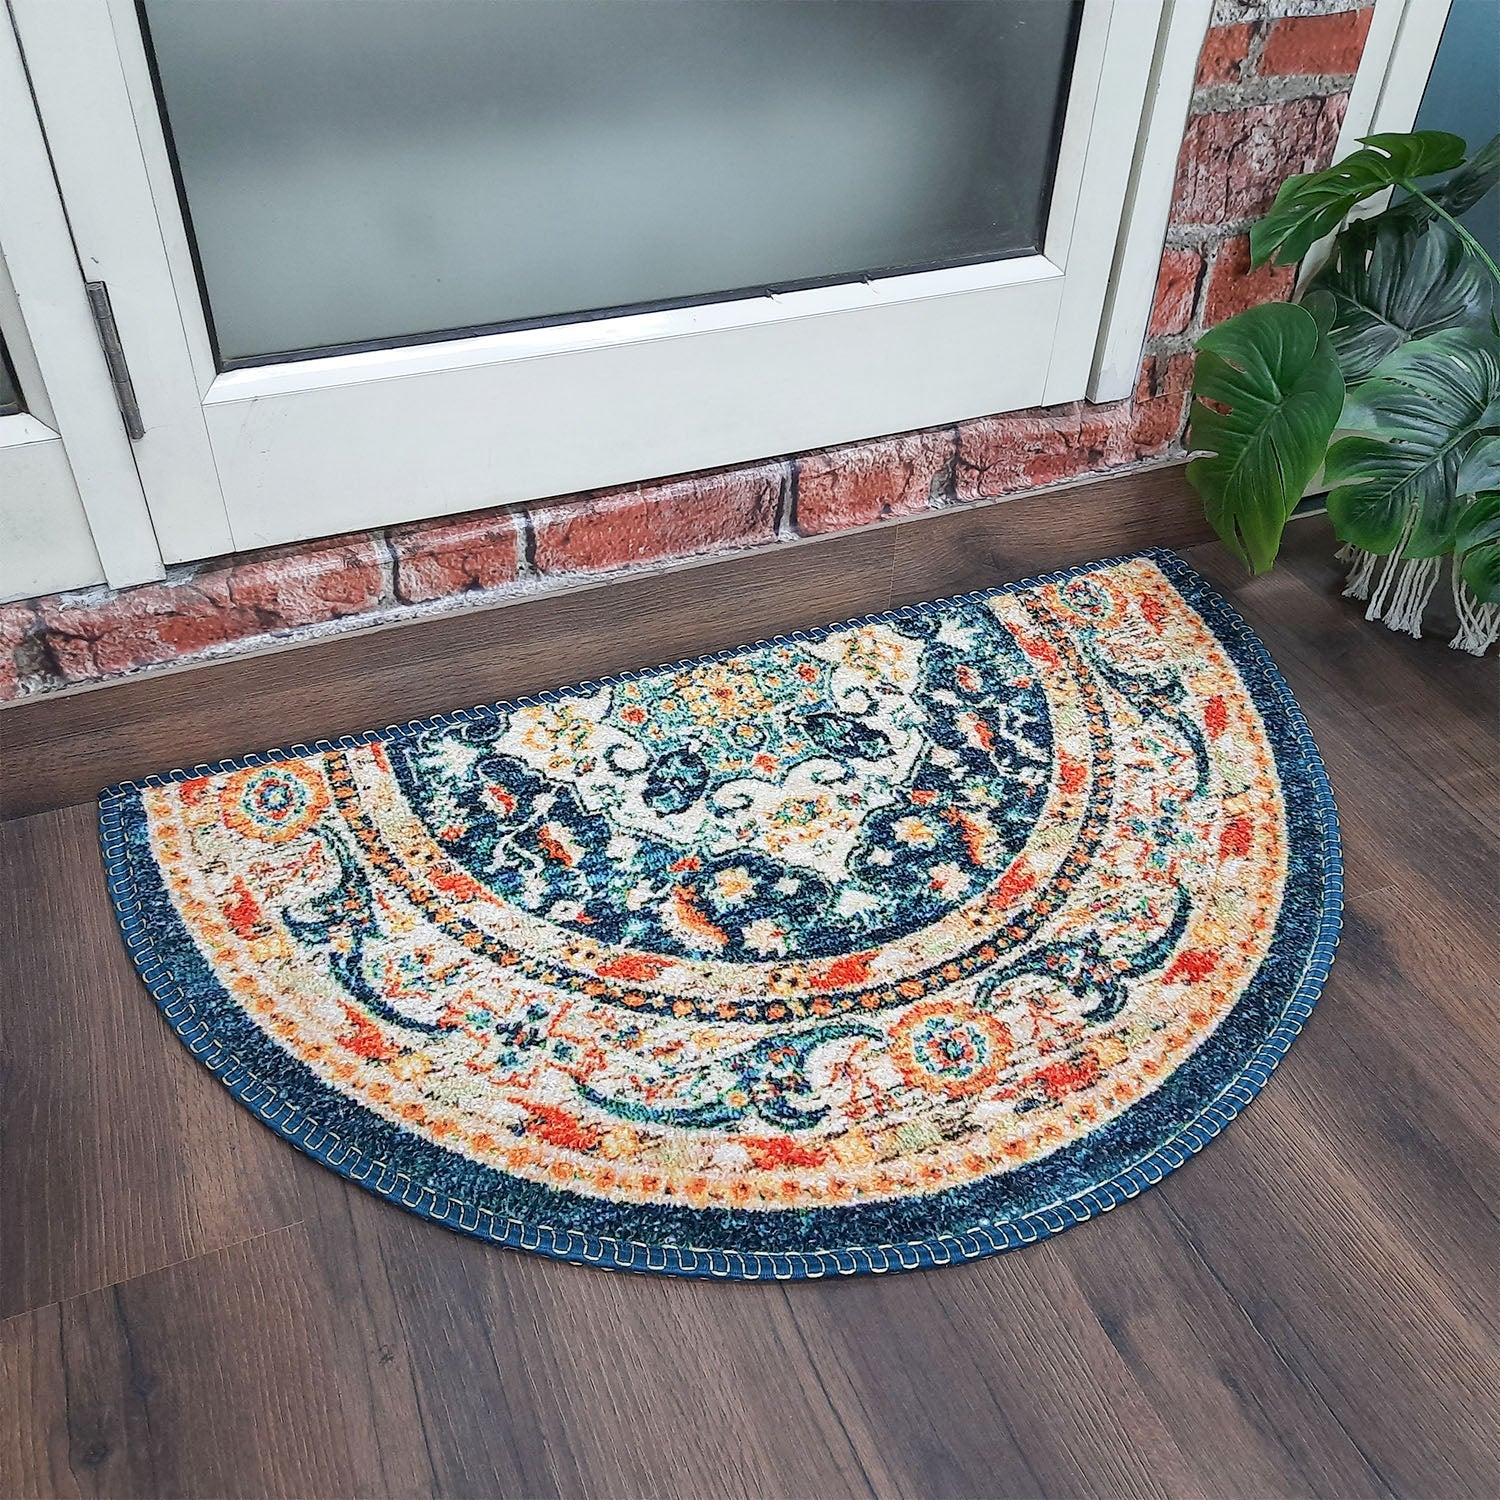 Easy Clean Floor Carpets for Entryway -Non Slip Outdoor Rugs With